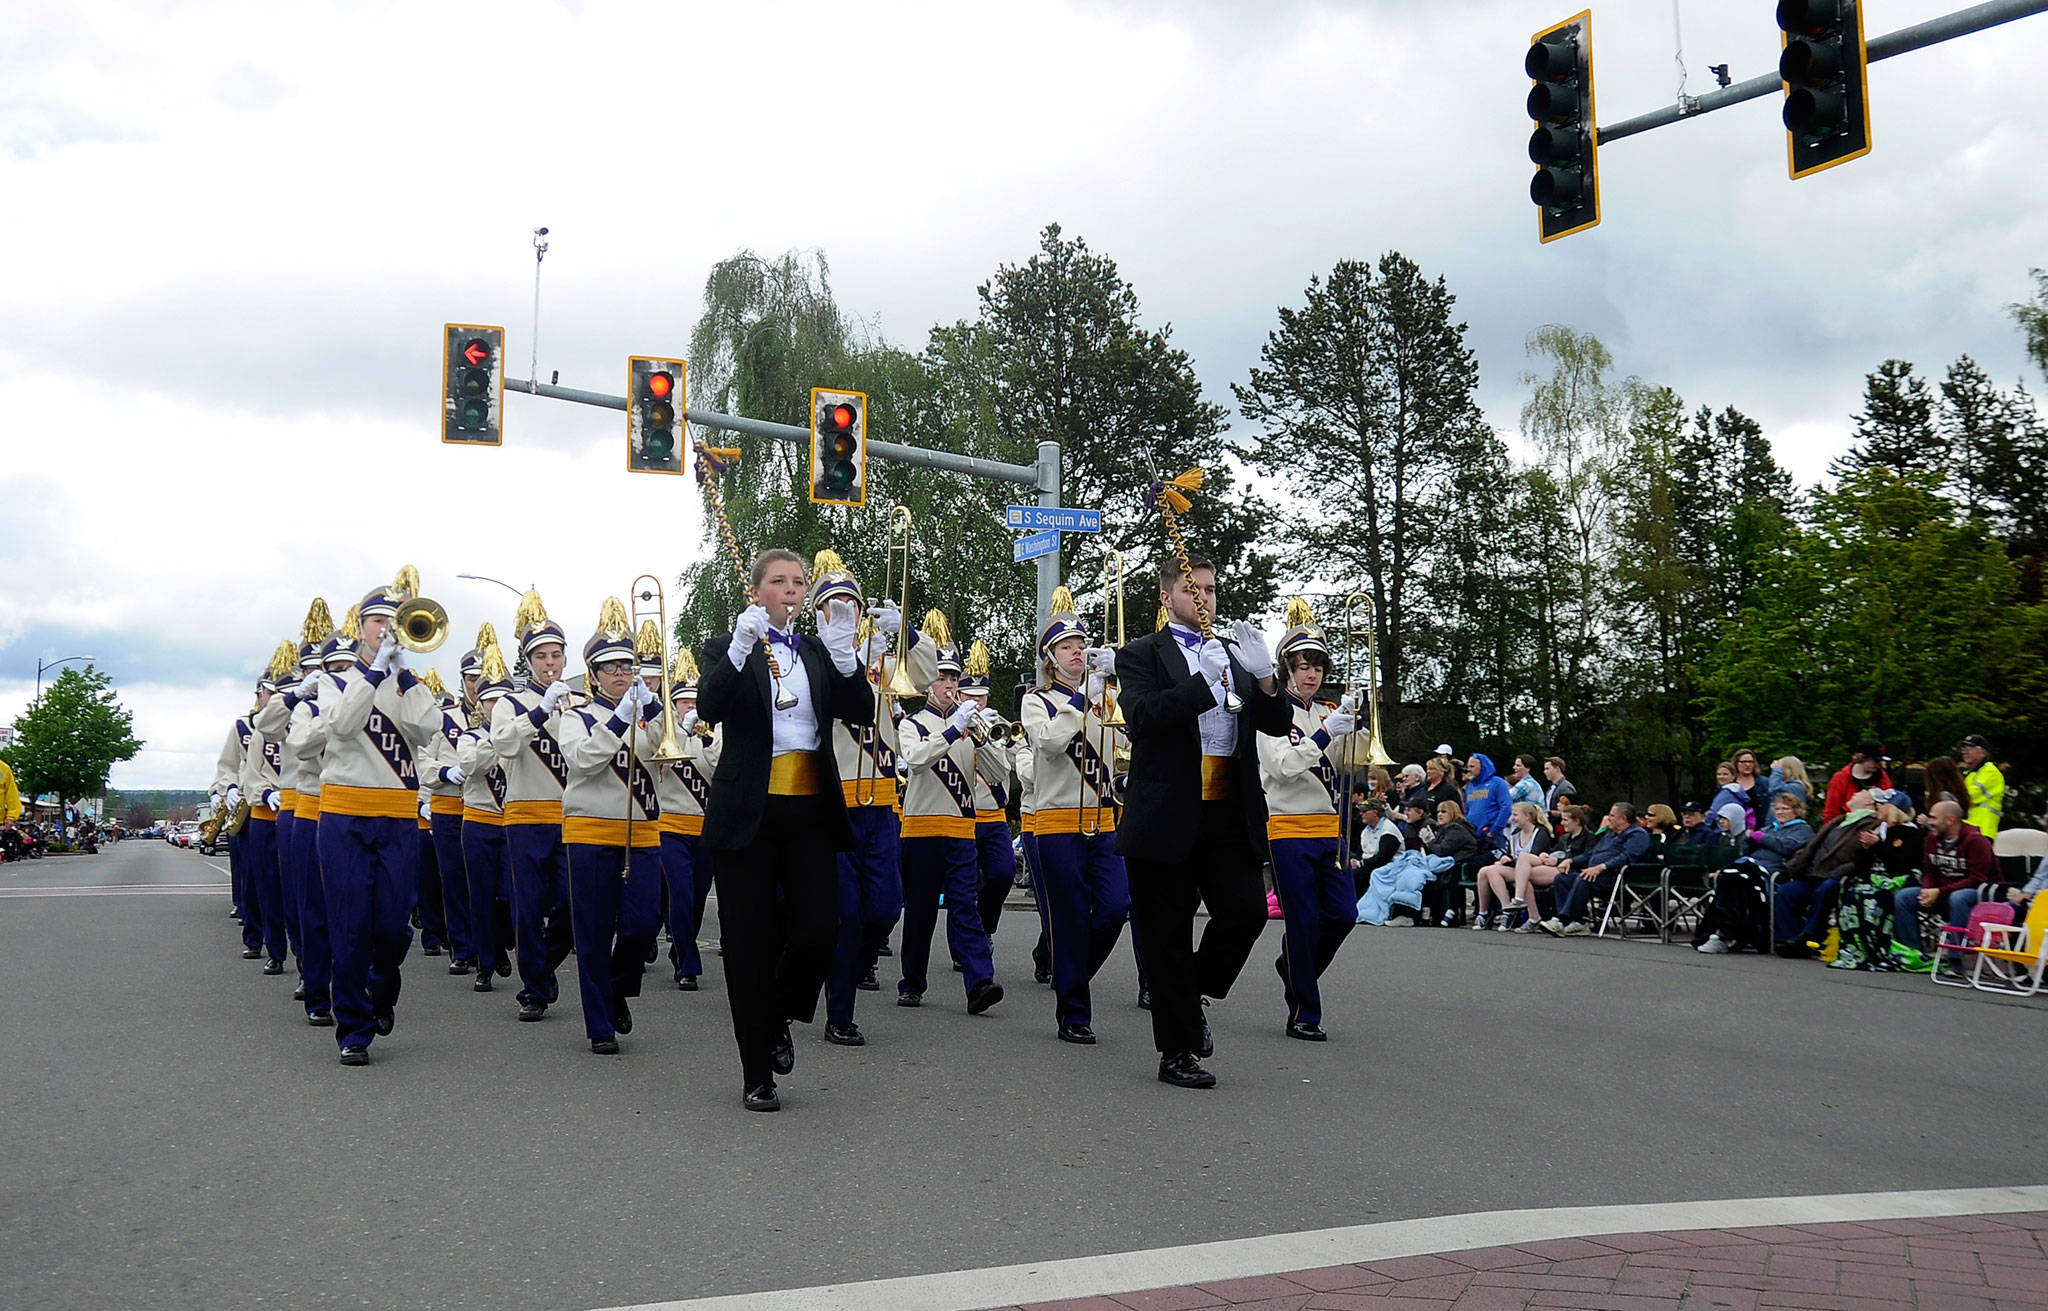 The Sequim High School Marching Band crosses Sequim Avenue in last year’s Sequim Irrigation Festival Grand Parade. This year they’ll make the trek along Washington Street as entry No. 18 on Saturday. (Michael Dashiell/Olympic Peninsula News Group)